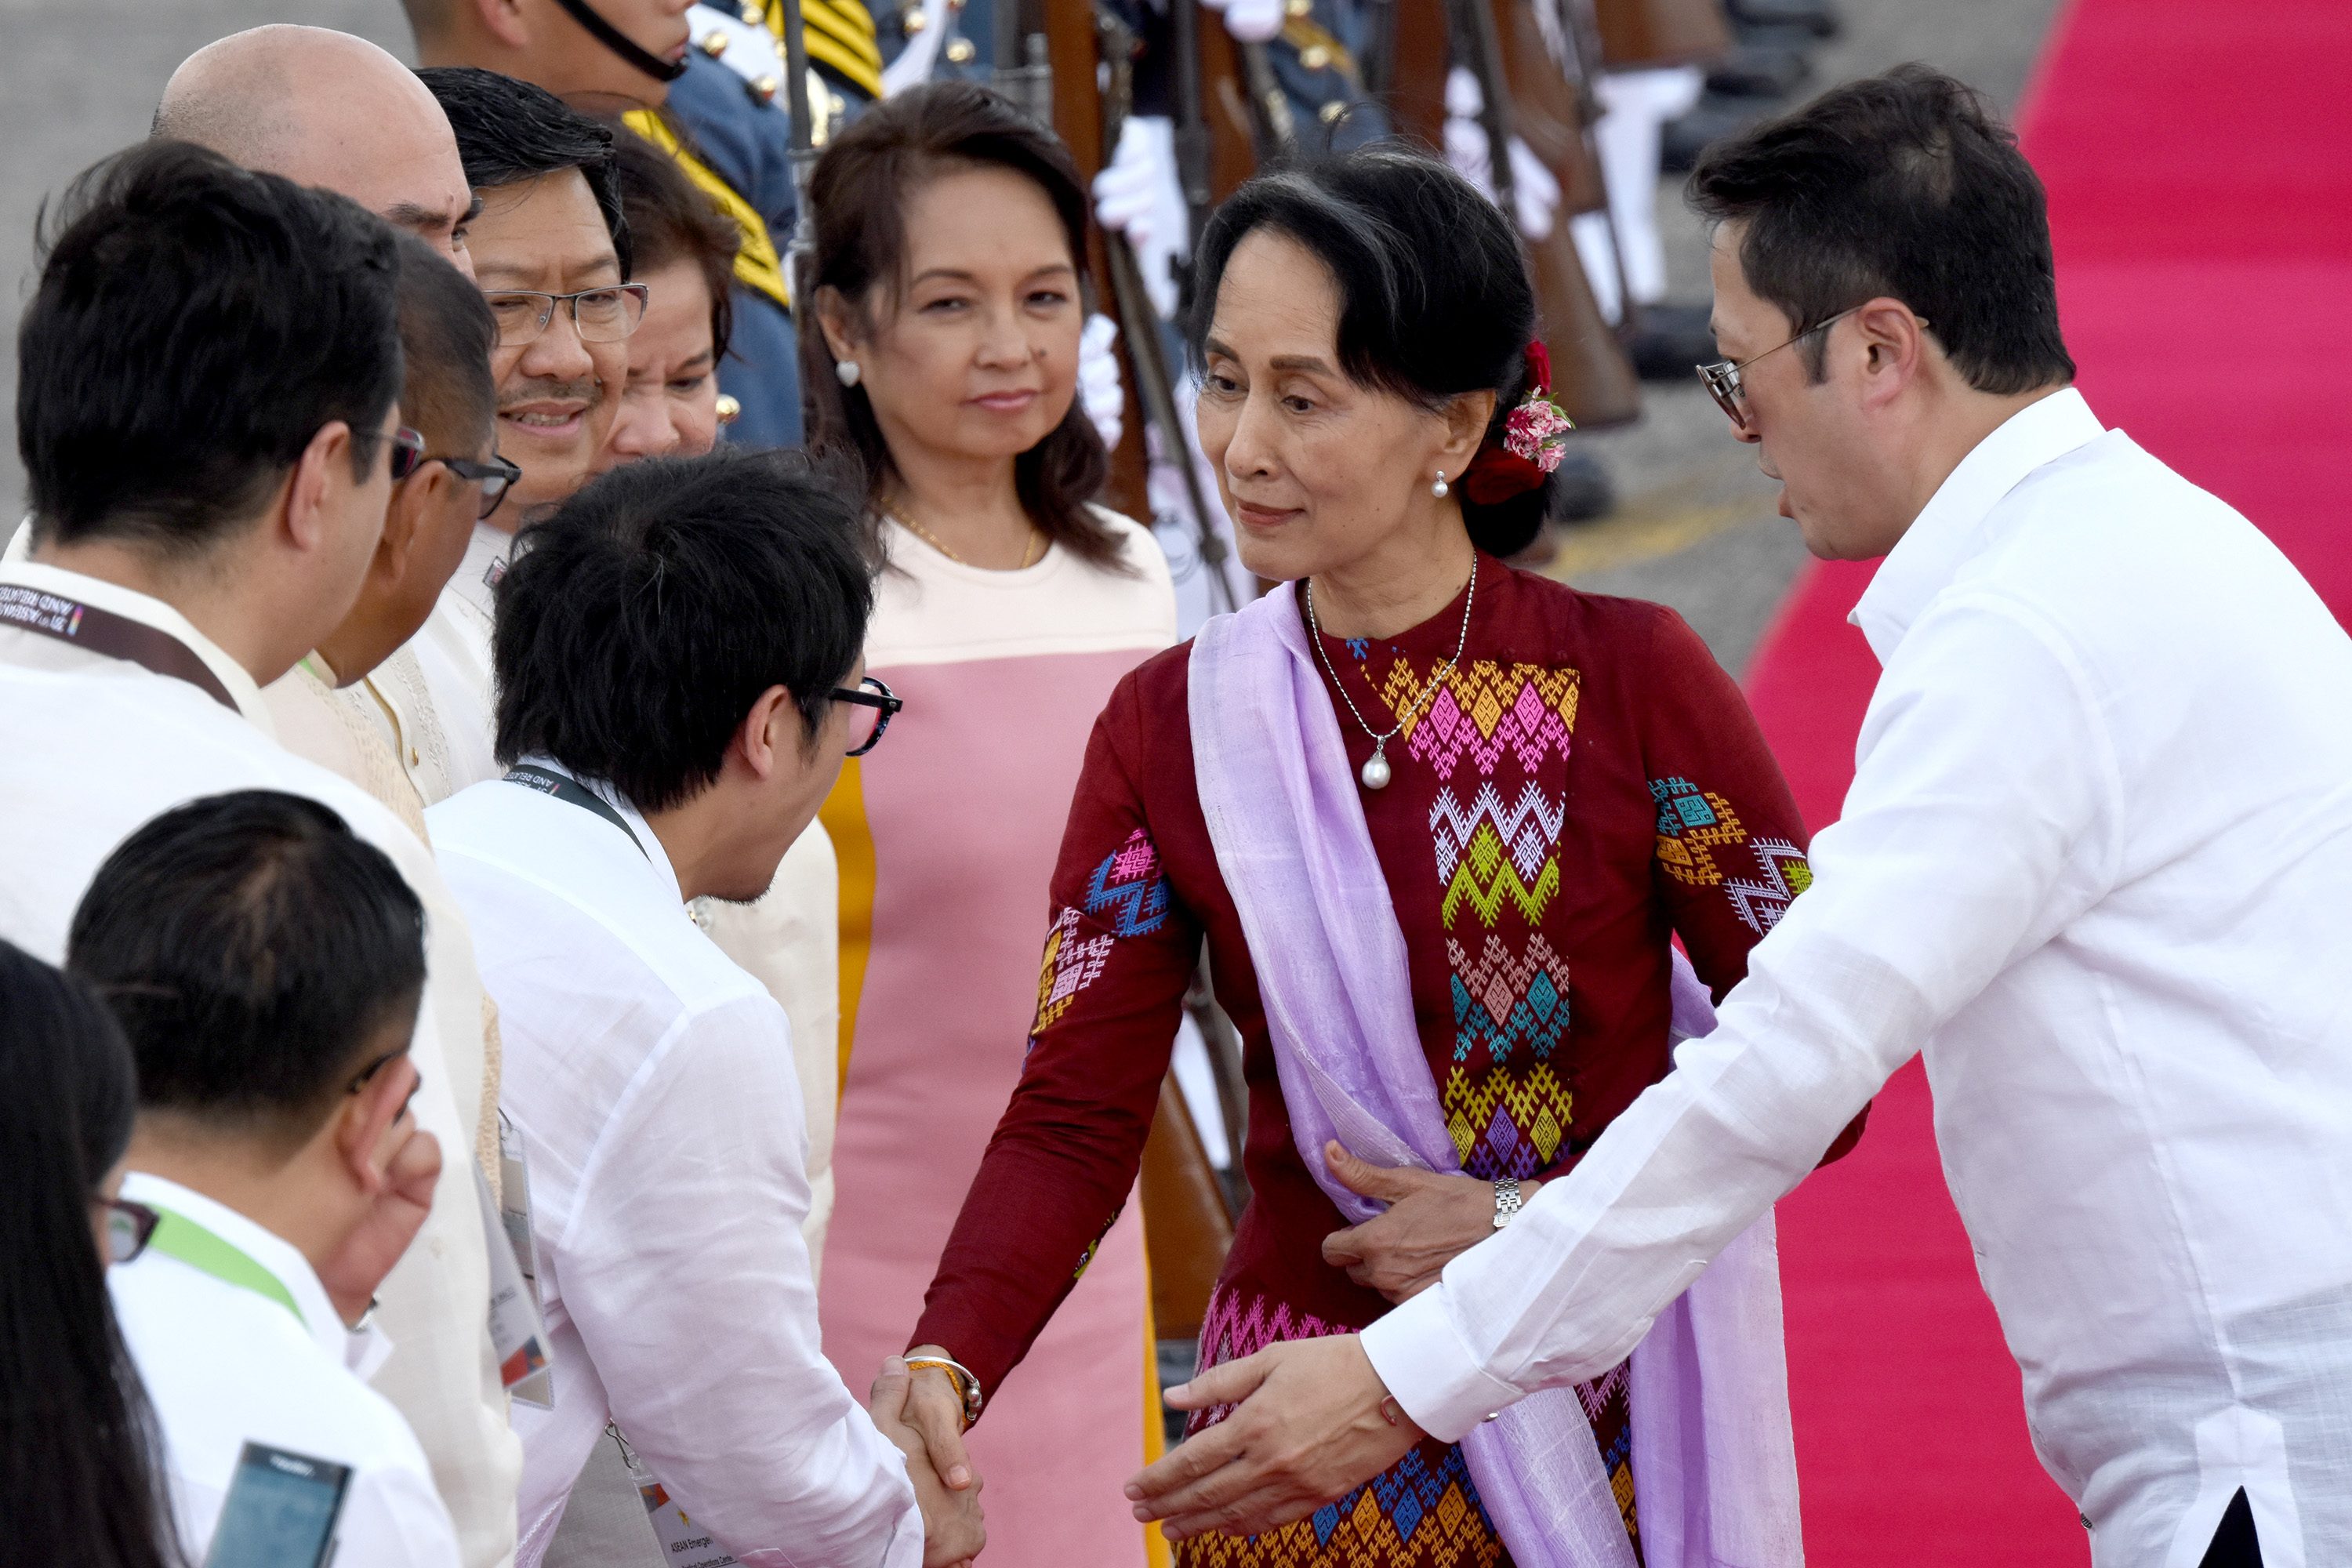 WORLD LEADER. Myanmar State Counselor Aung San Suu Kyi is the second world leader to land in the Philippines on November 11, 2017, for the ASEAN Summit. Photo by Angie de Silva/Rappler 